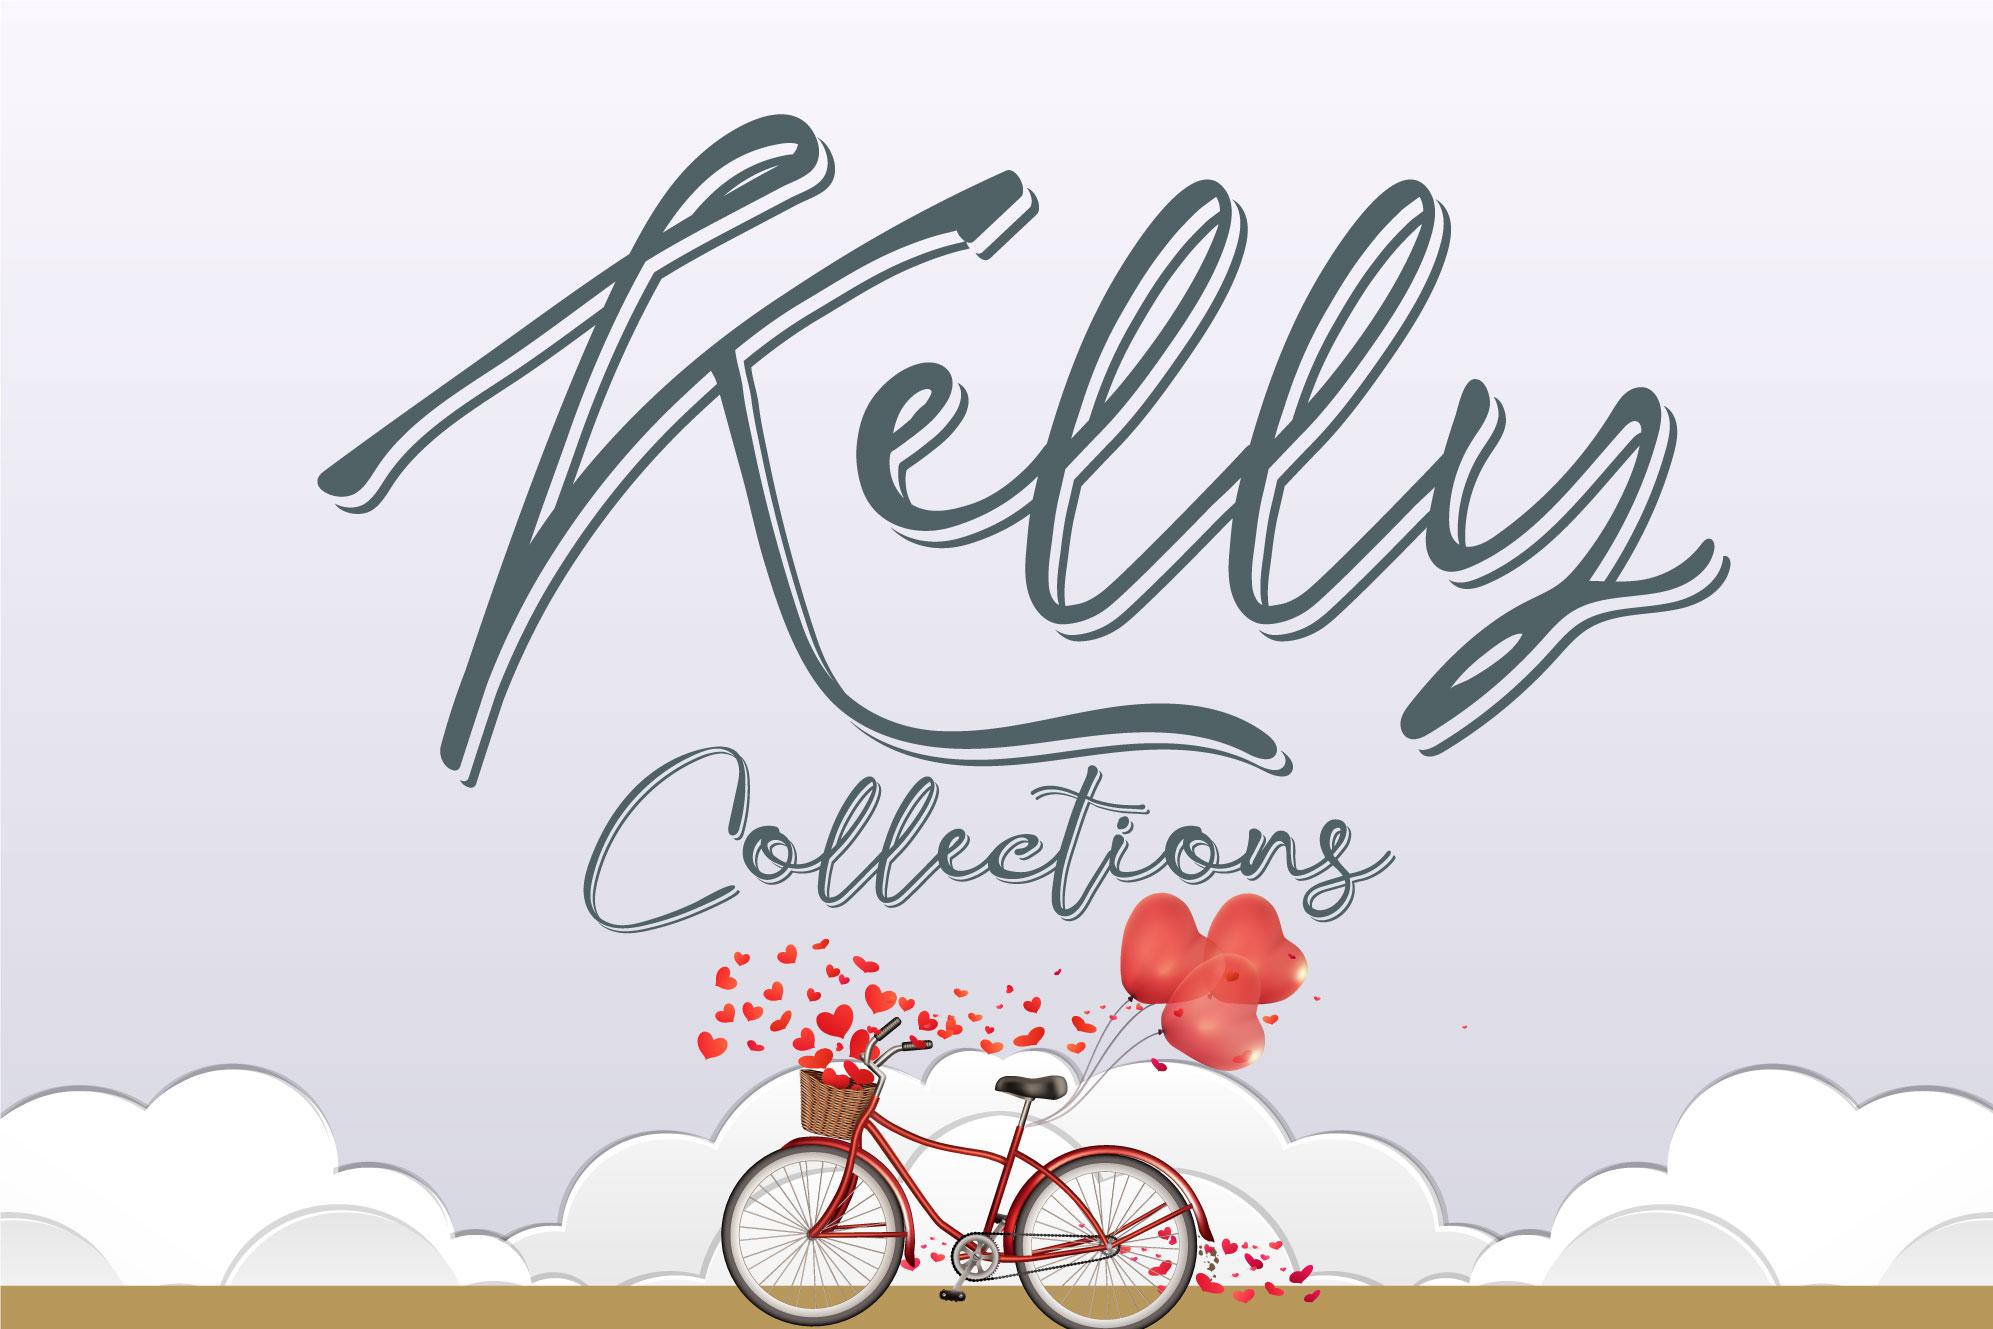 Kelly Collections Font